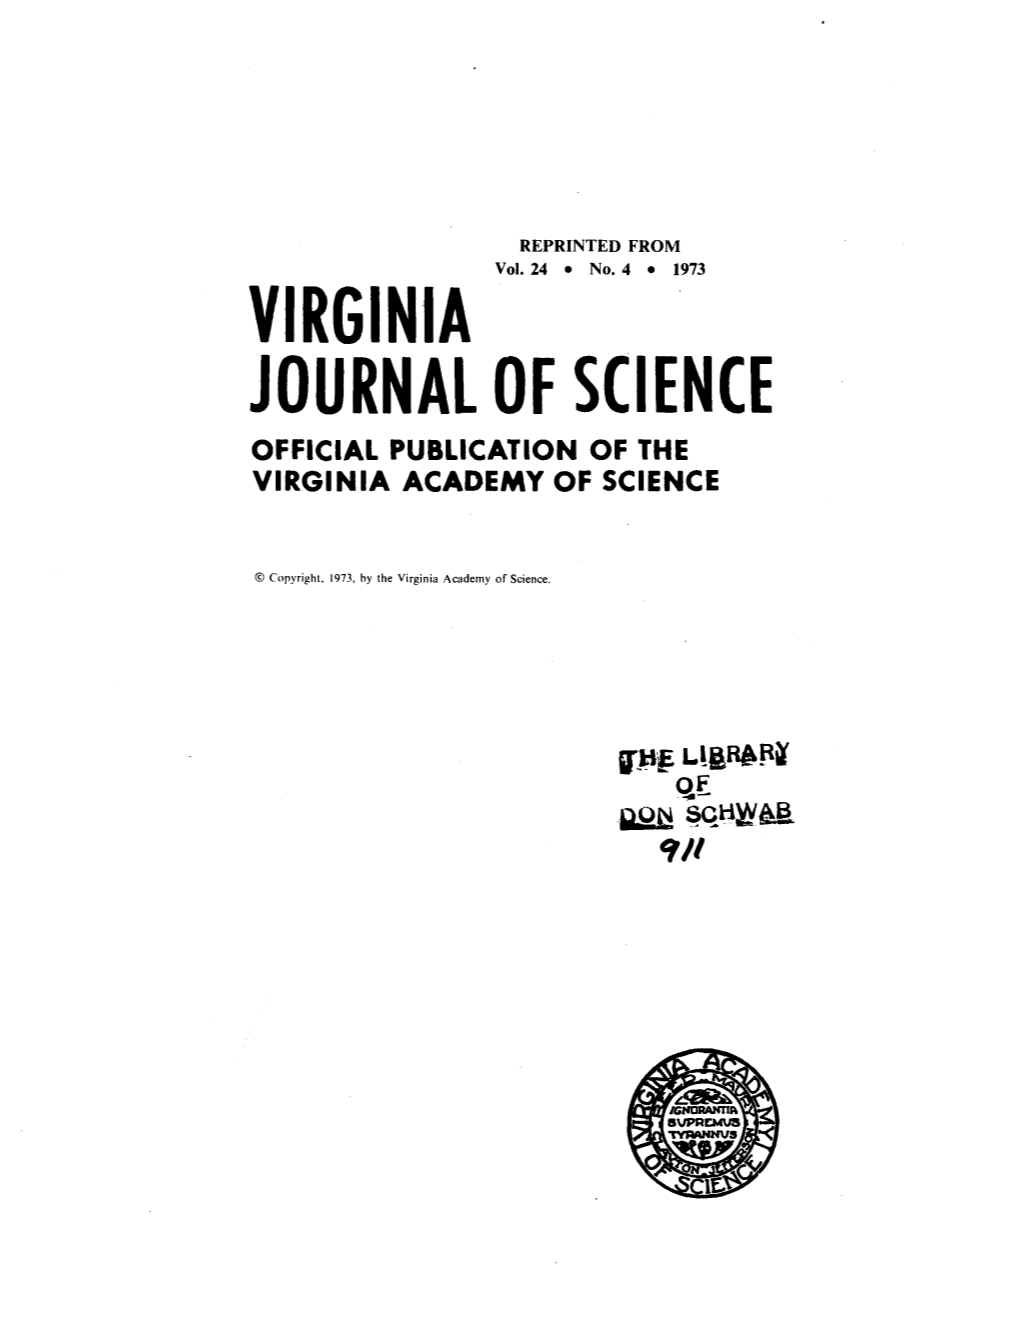 Virginia Journal of Science Official Publication of the Virginia Academy of Science